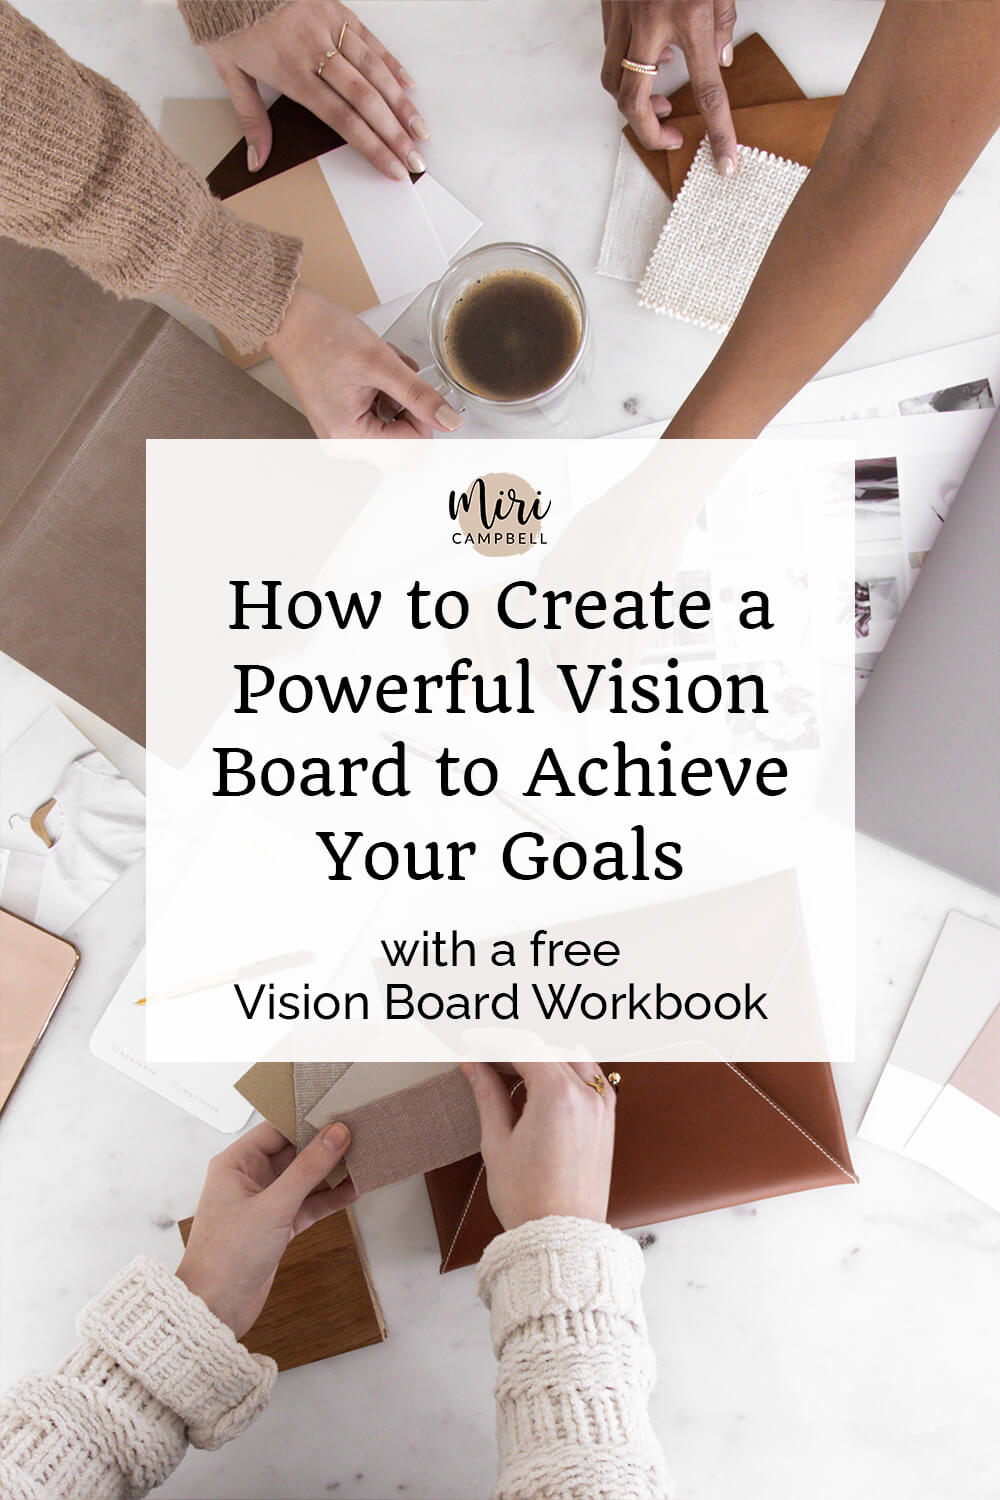 How to Create a Powerful Vision Board to Achieve Your Goals